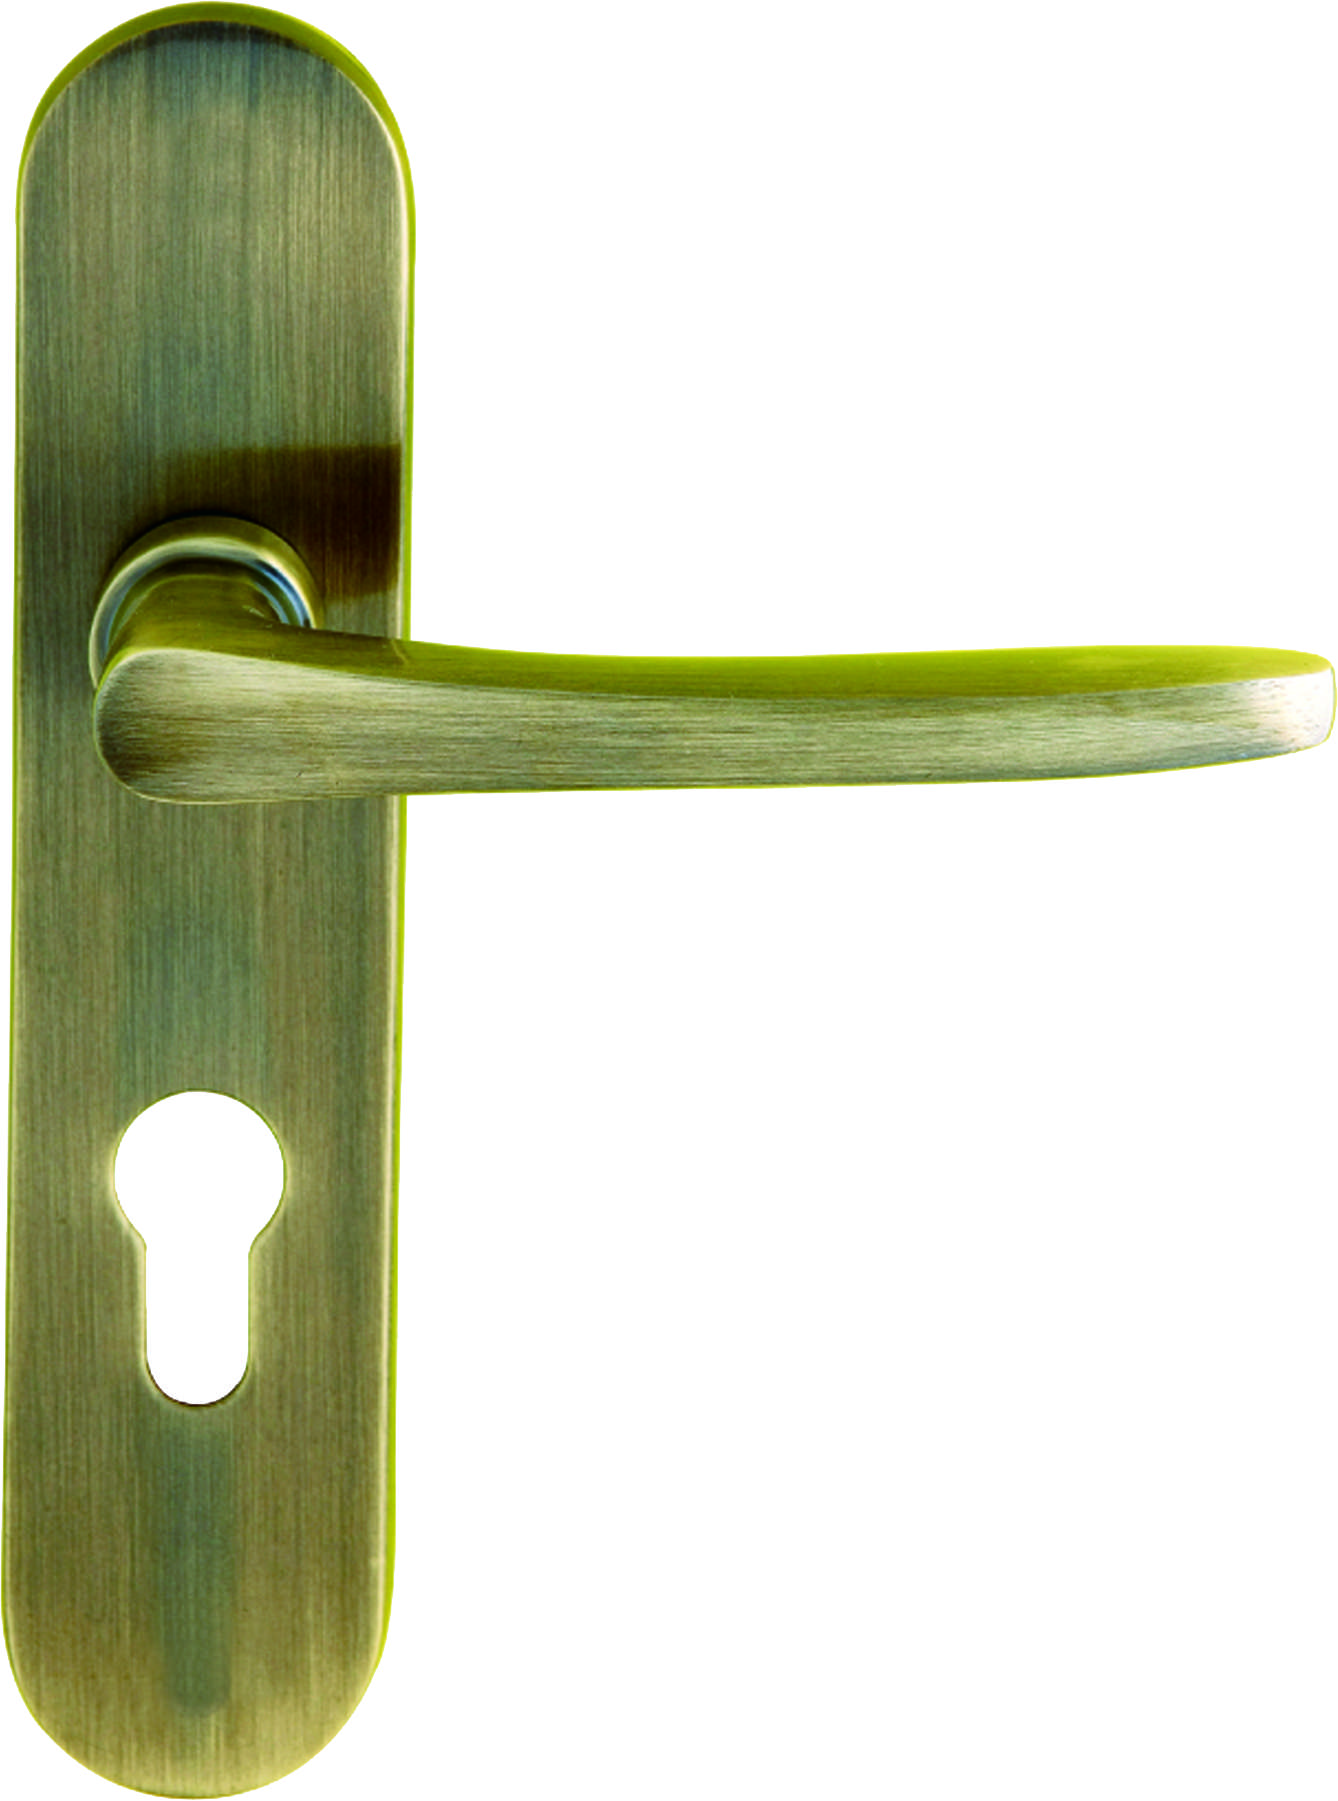 Good Quality Brass Door Handle From China 